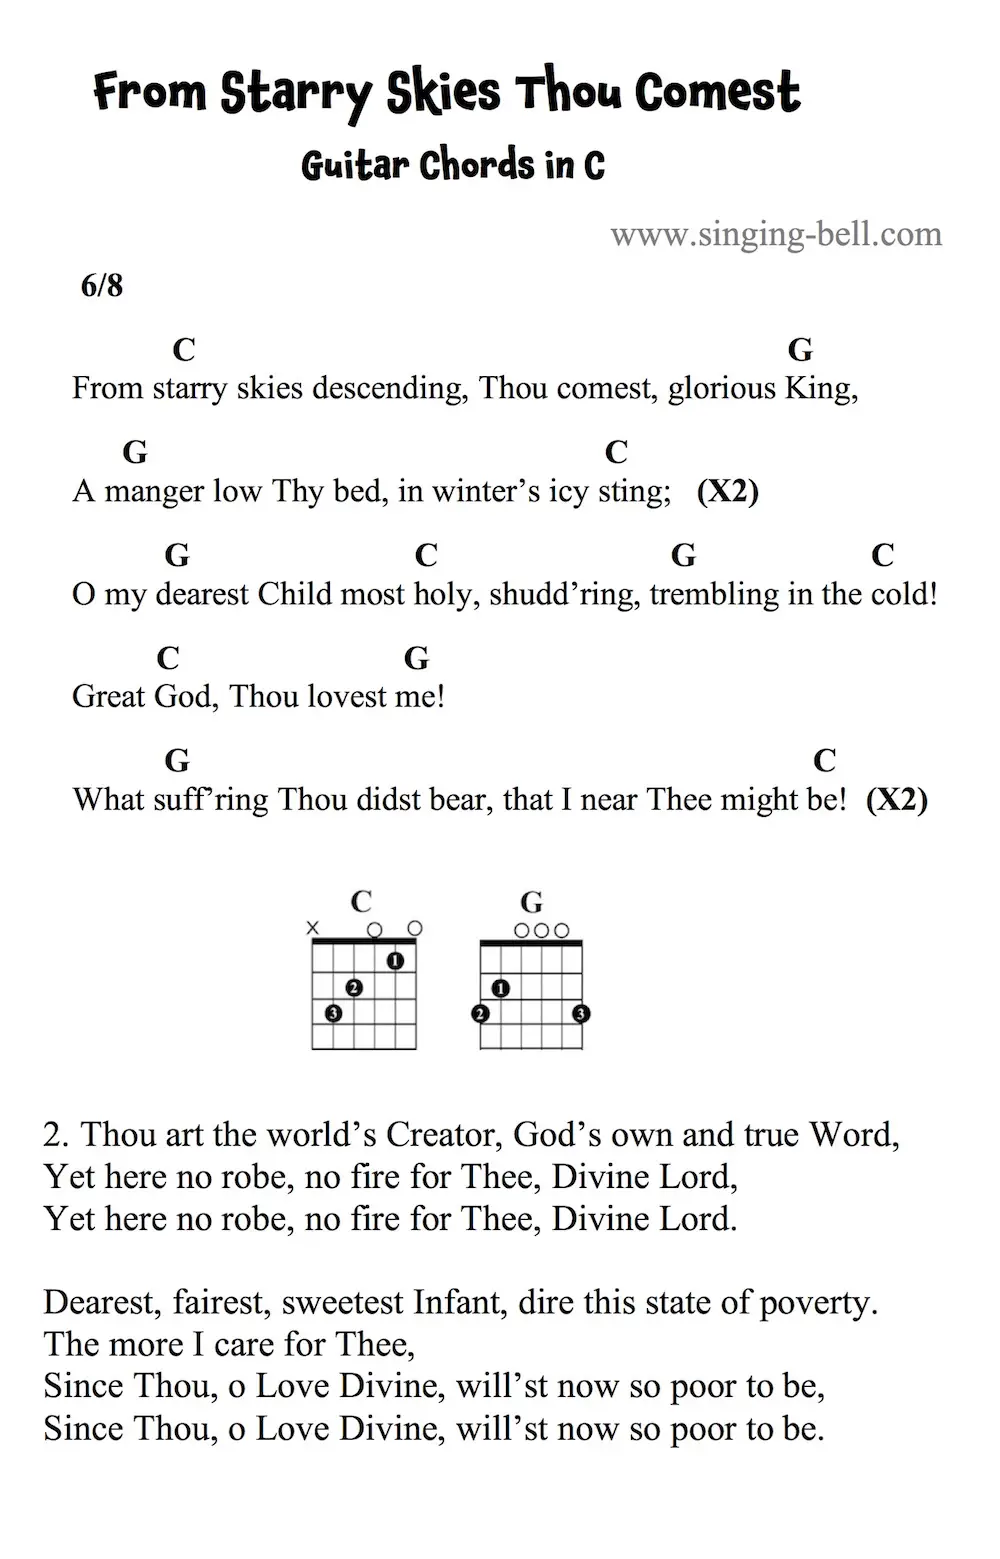 From Starry Skies Thou Comest (Tu scendi dalle stelle) guitar chords and tabs in C.